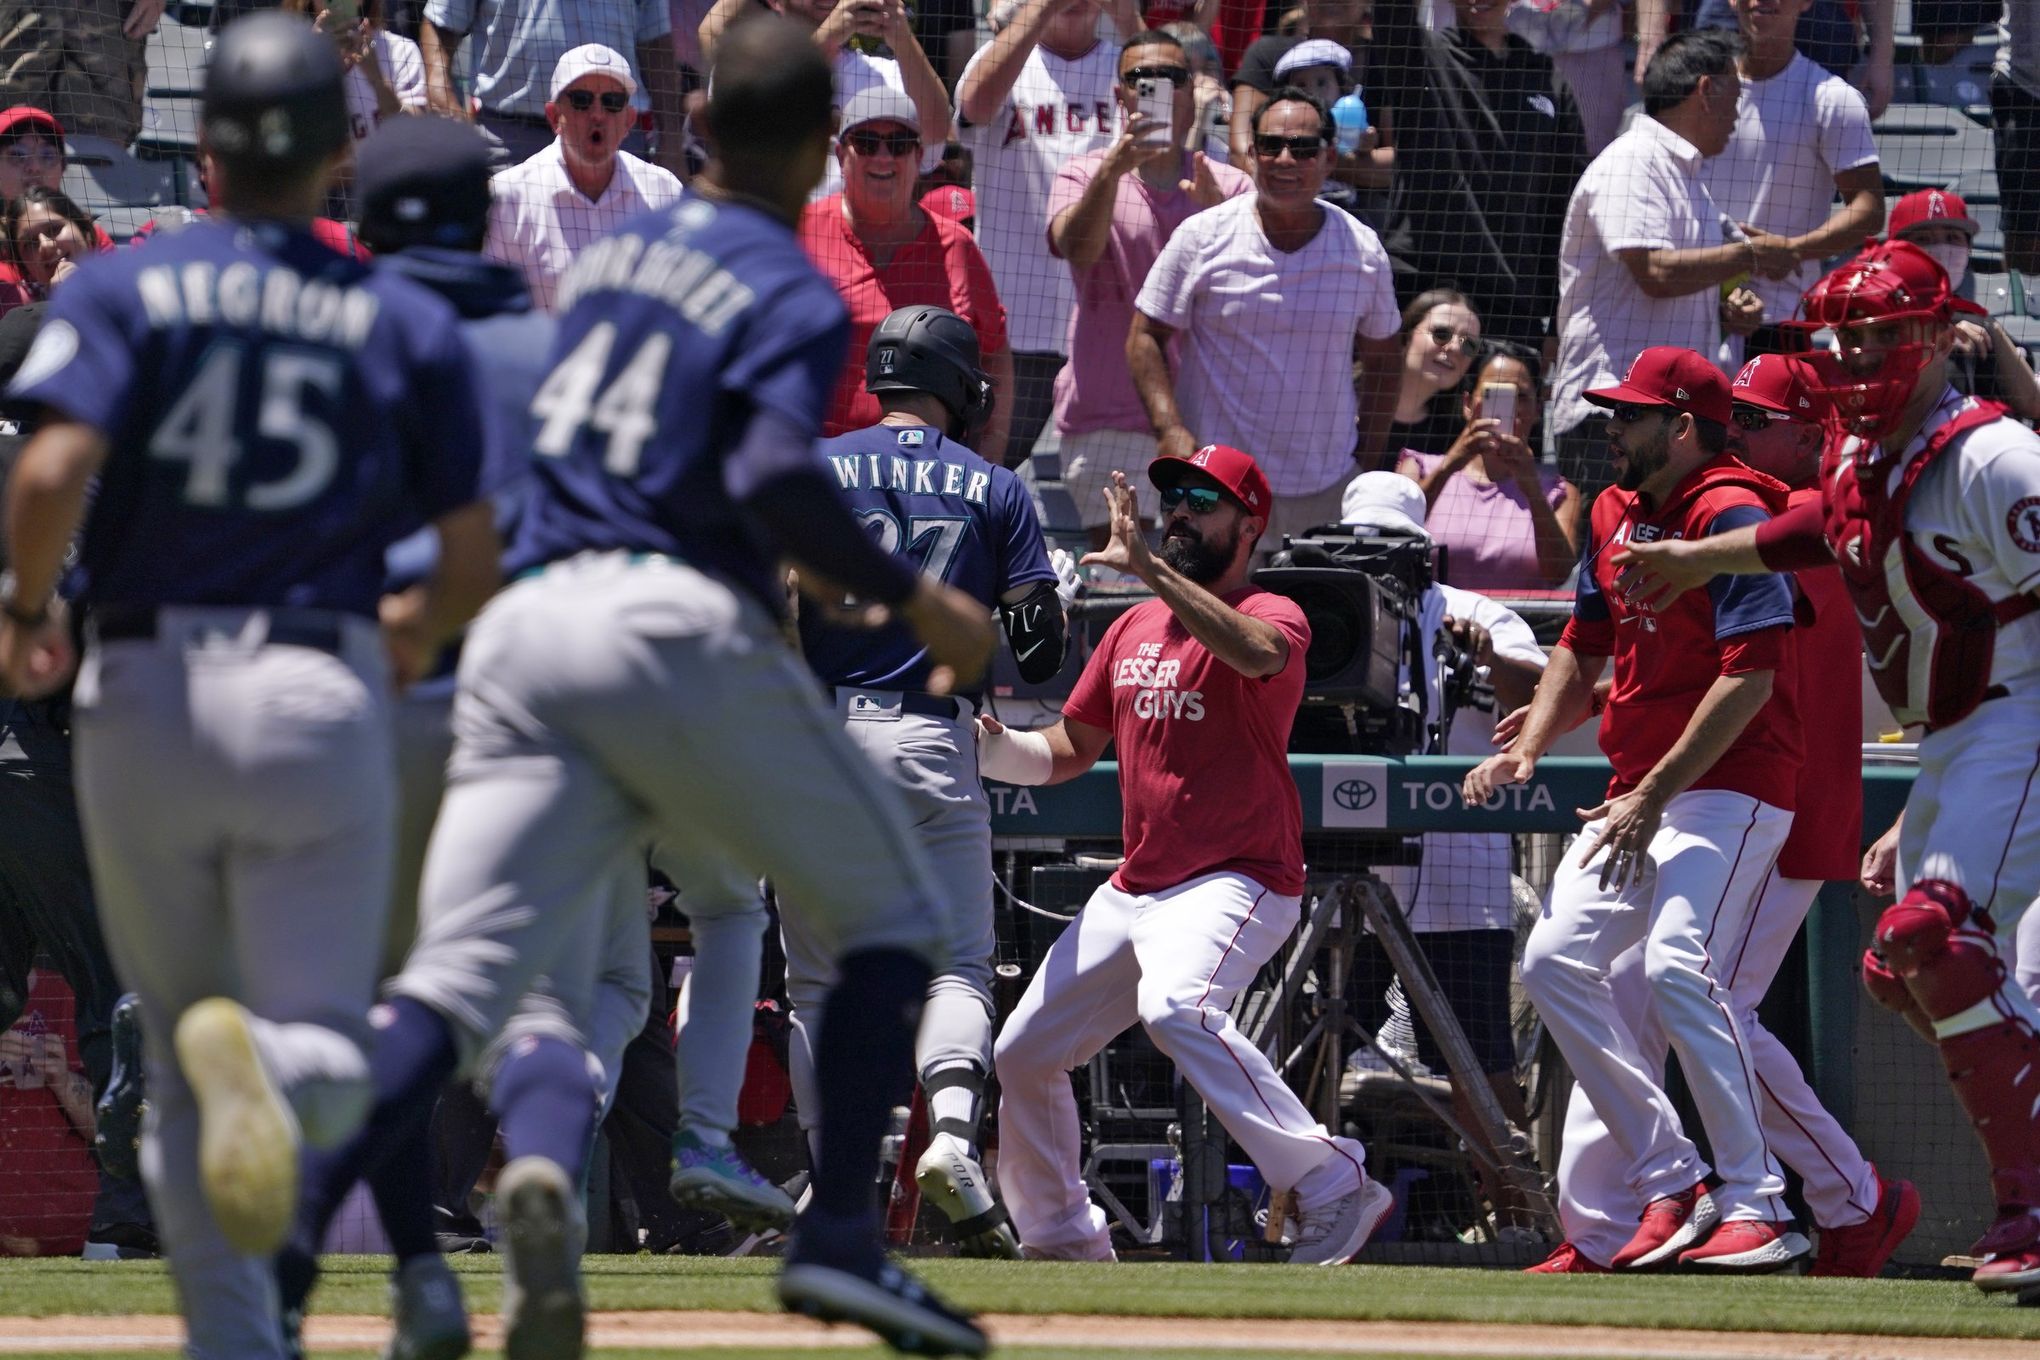 Angels vs Mariners: Mass brawl and eight ejections overshadow Los